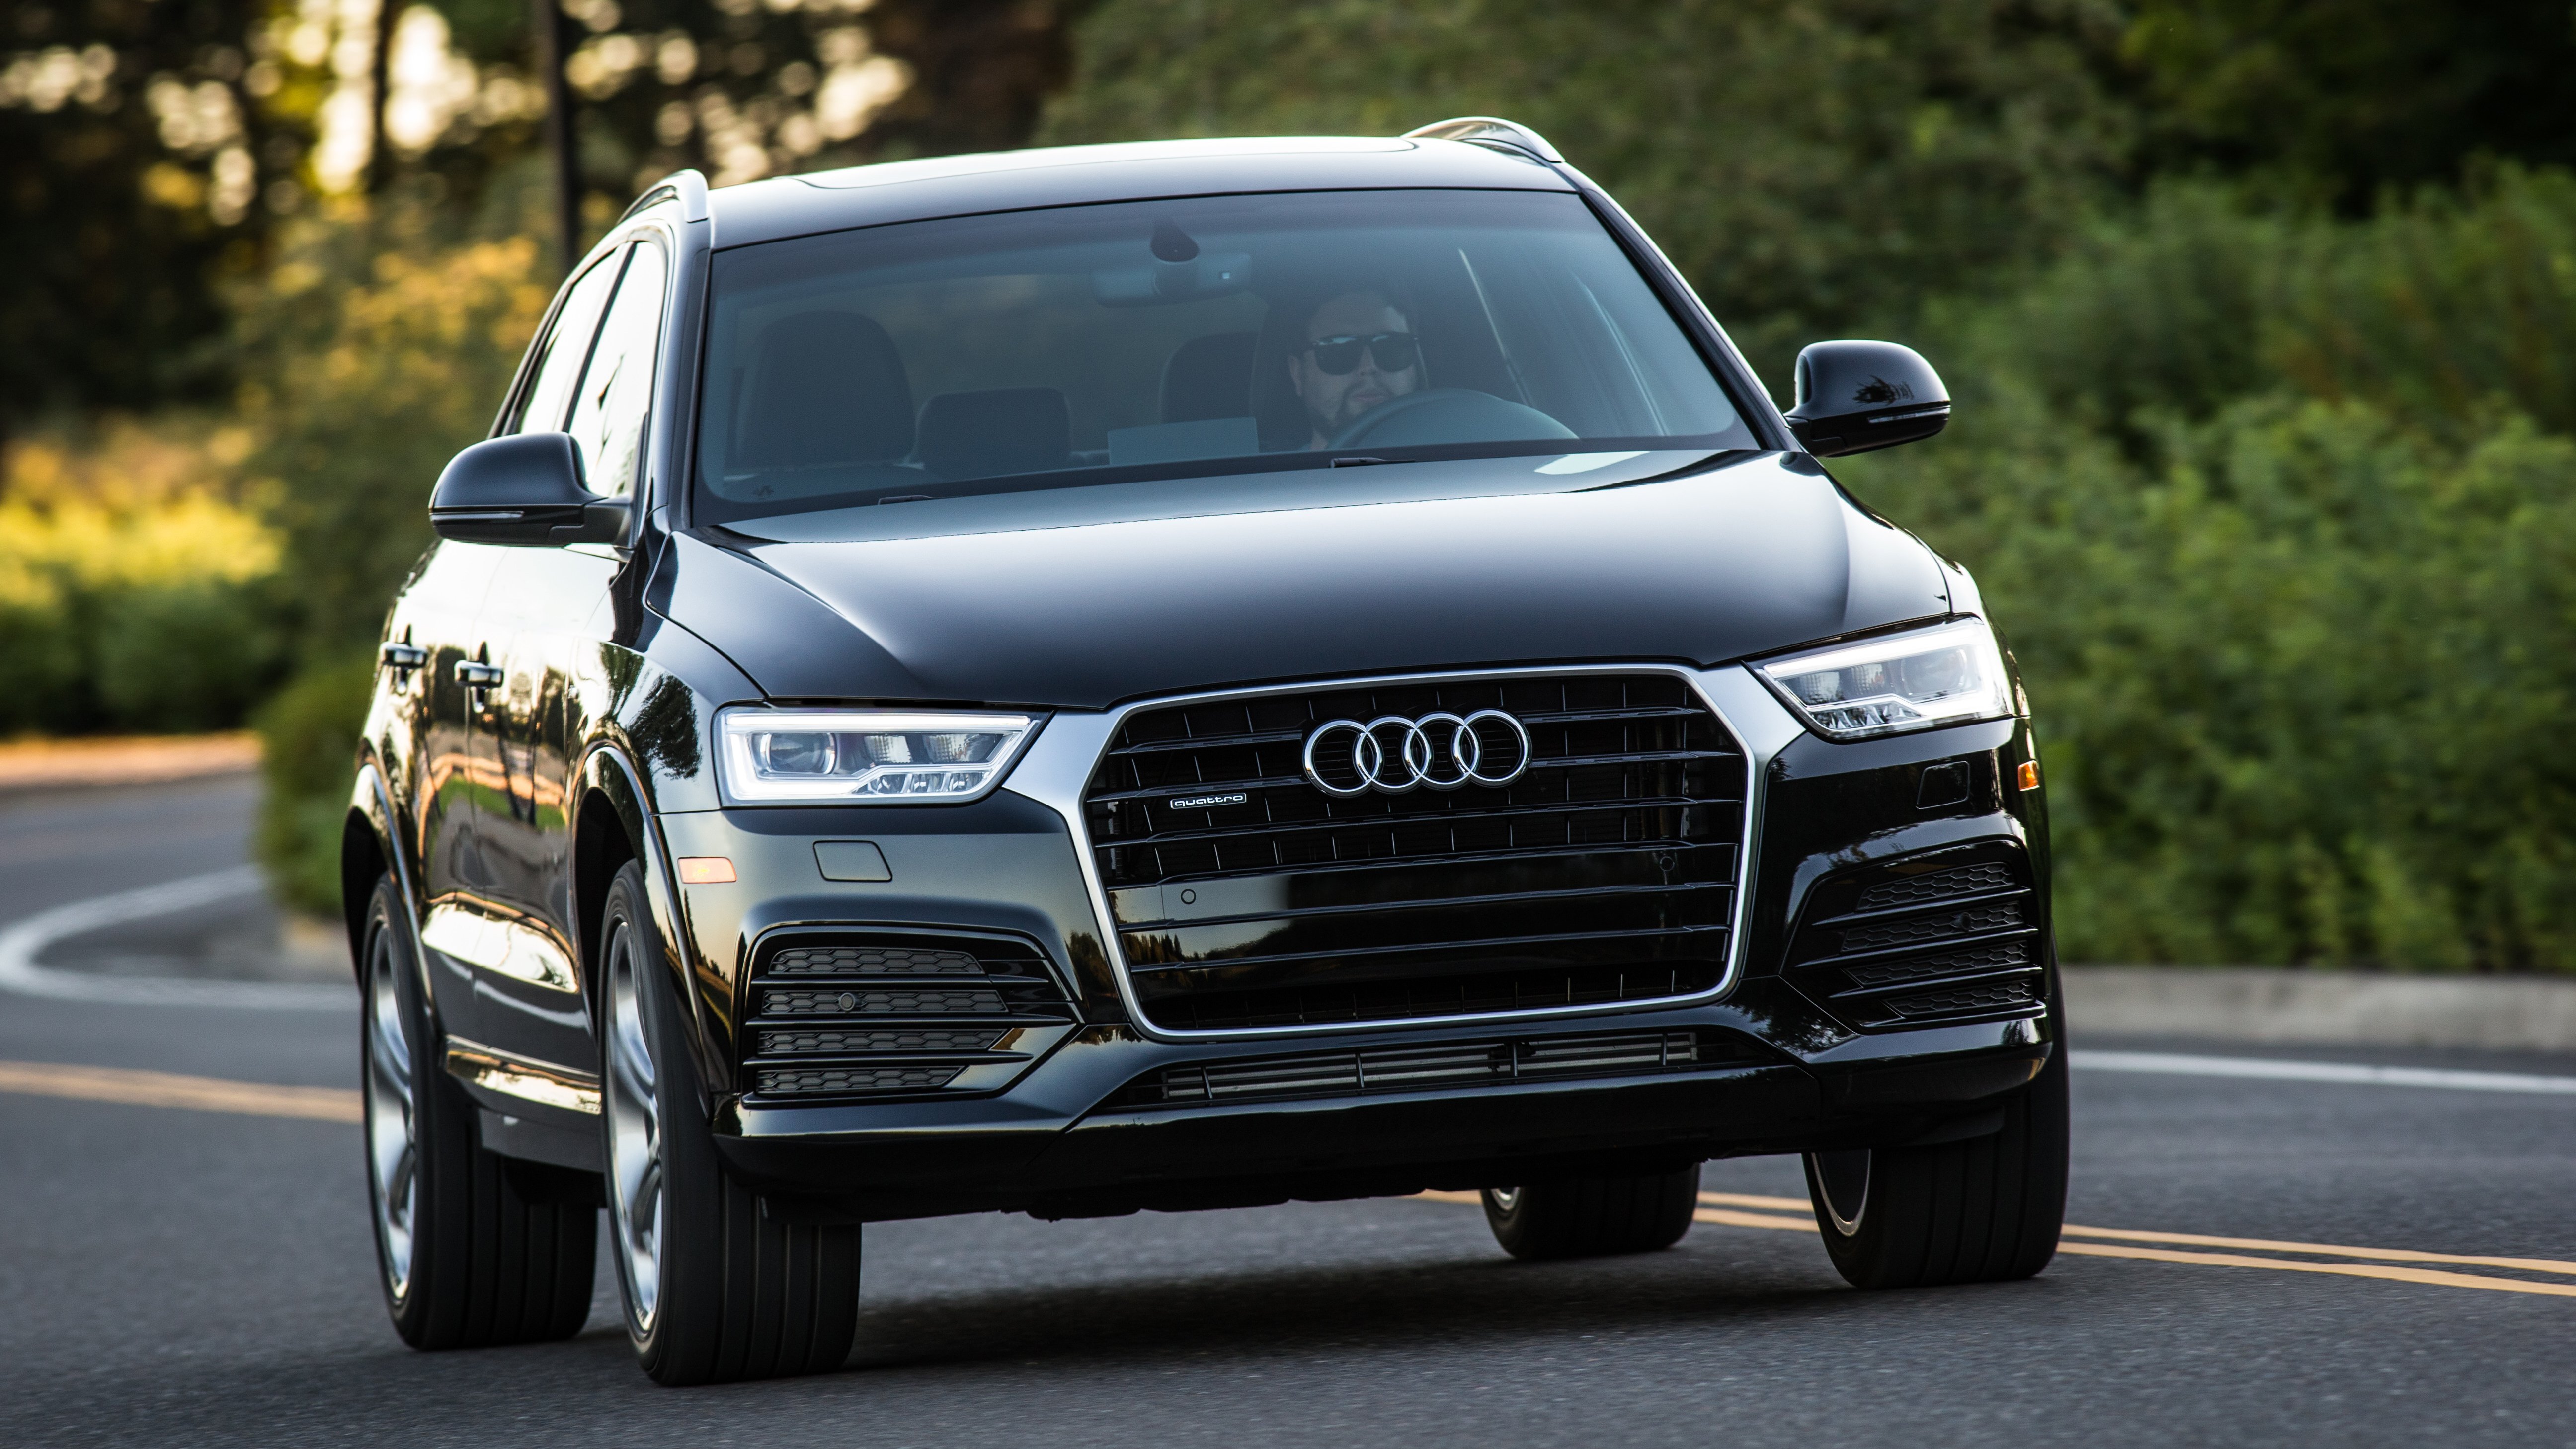 Audi announces pricing for the updated 2016 Q3 crossover